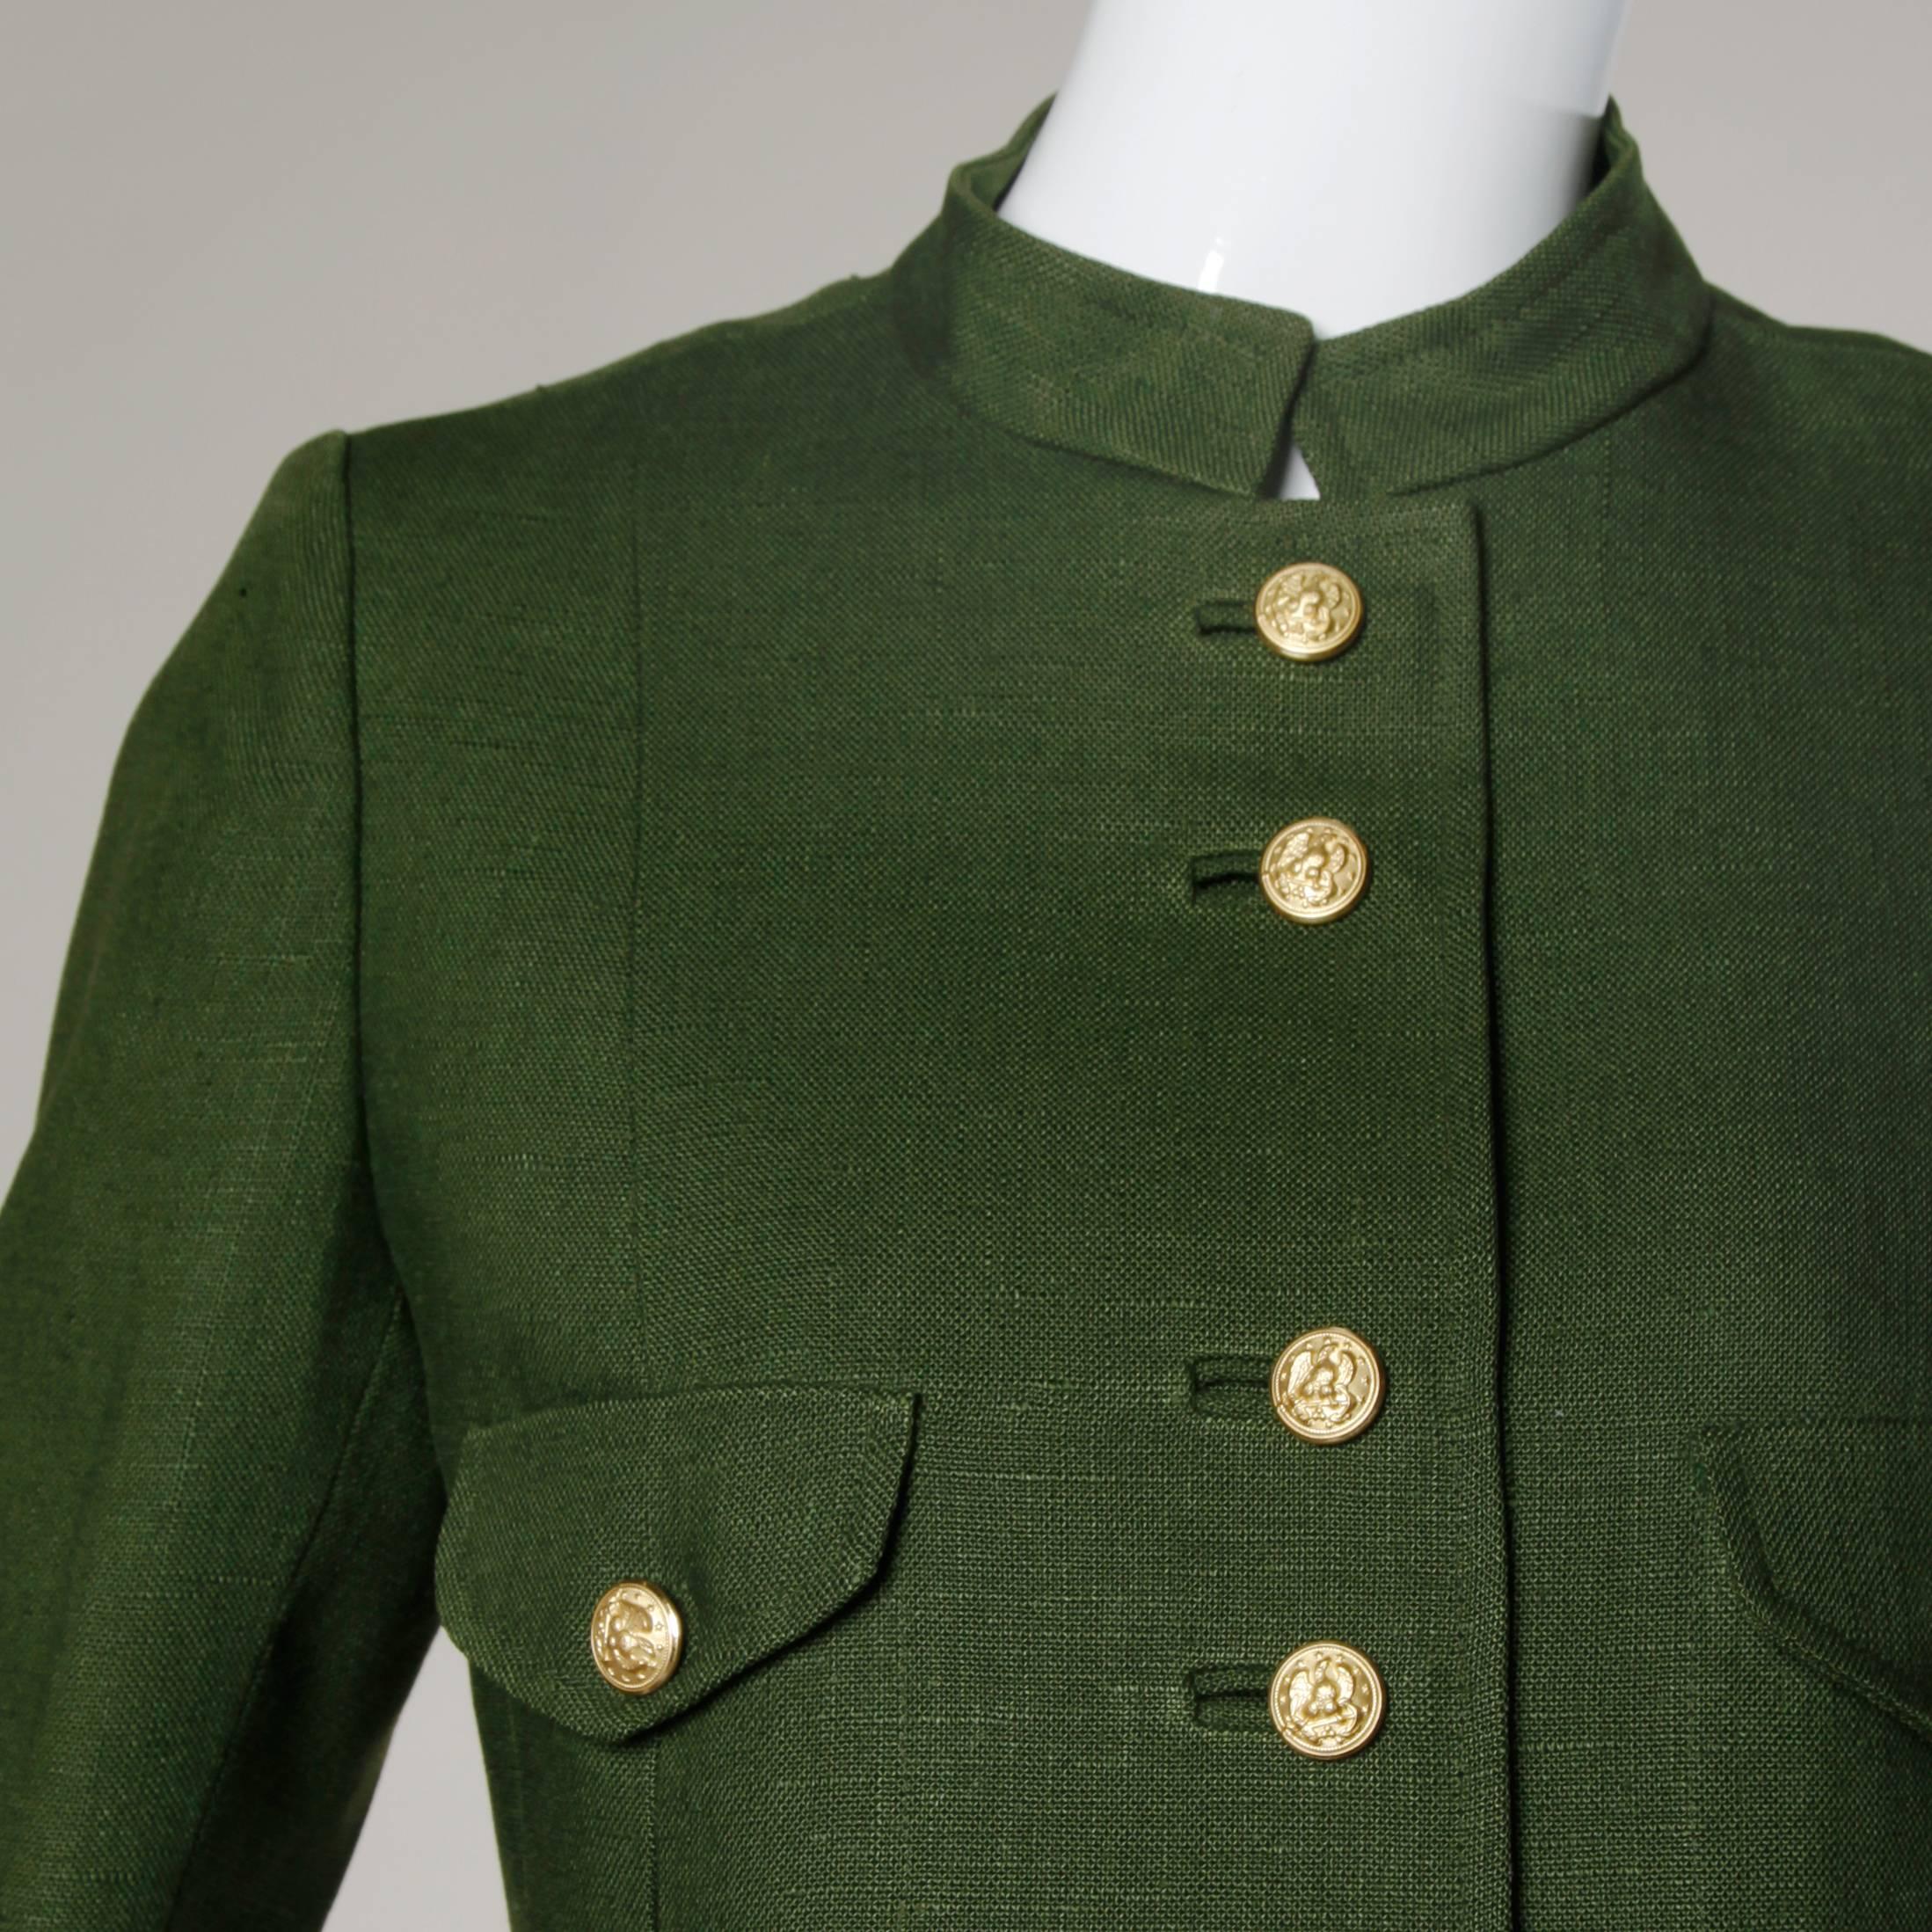 Pristine tailored military-inspired jacket in olive green by Modelia for Bergdorf Goodman. Heavy brass buttons and bound button holes.

Details:

Fully Lined
Front Button Closure
Marked Size: Not Marked
Estimated Size: Medium
Color: Olive